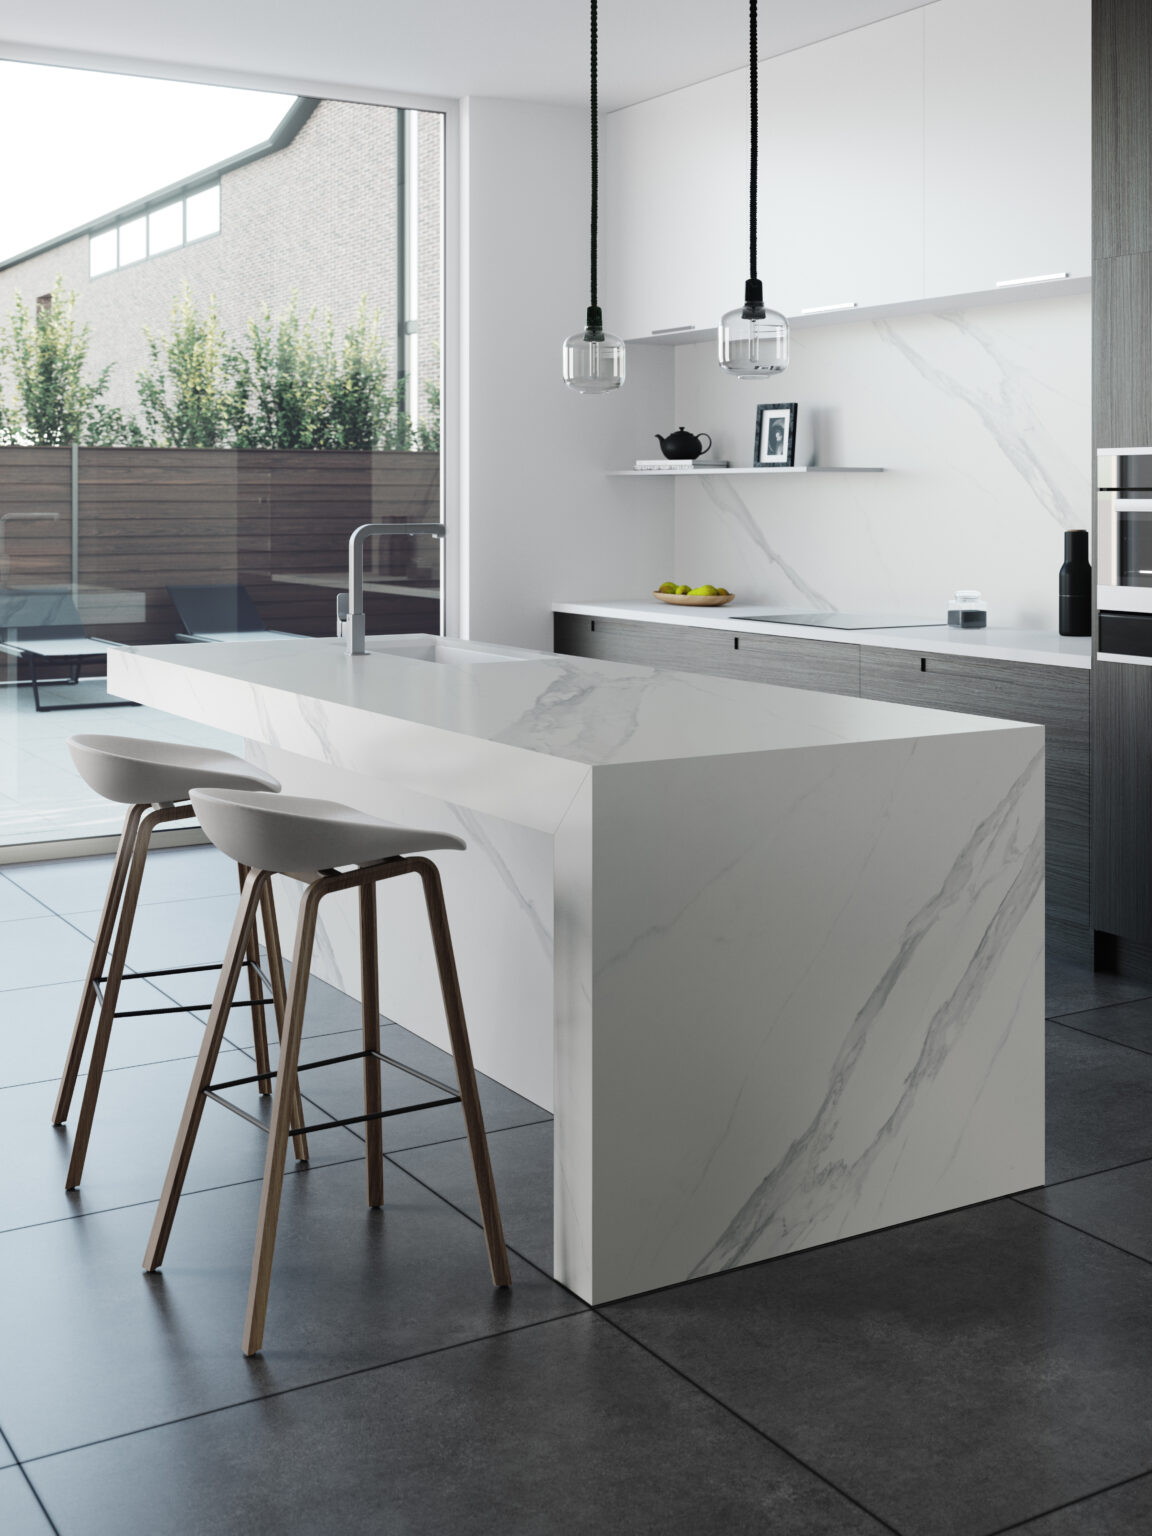 Dekton by Cosentino Introduces Two New MarbleInspired Colours